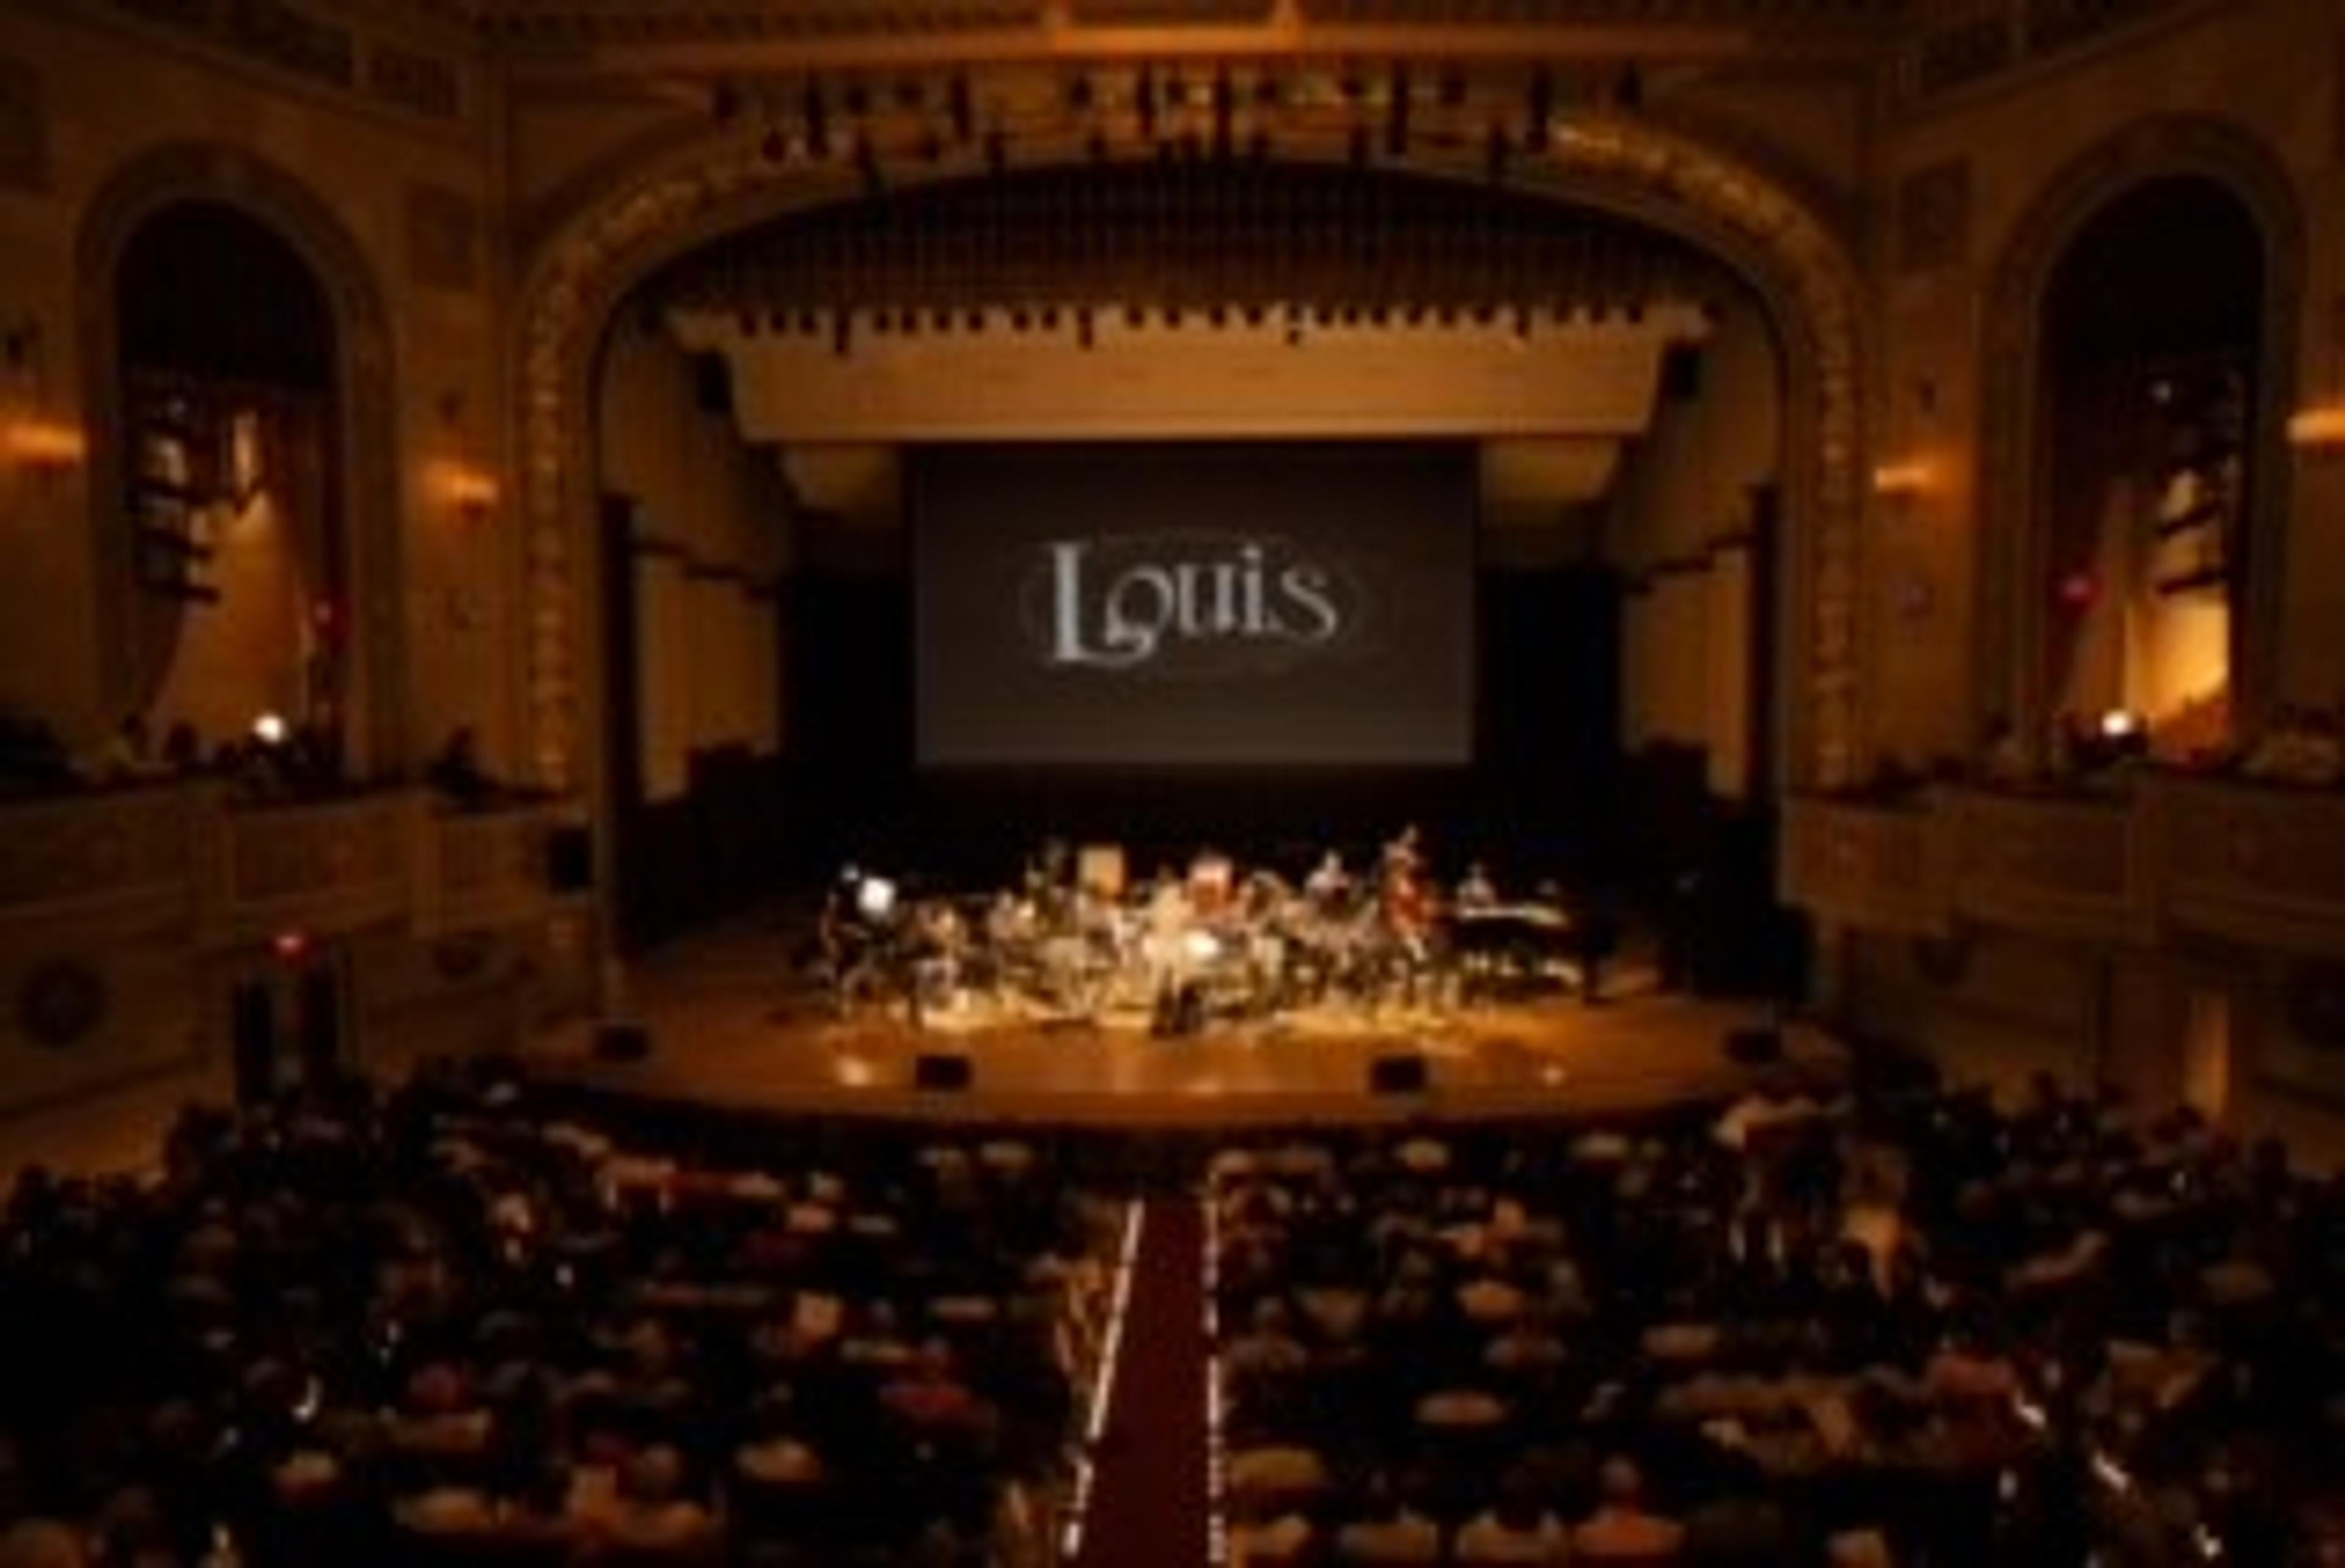 Jazz band on stage in a concert hall, with large screen behind